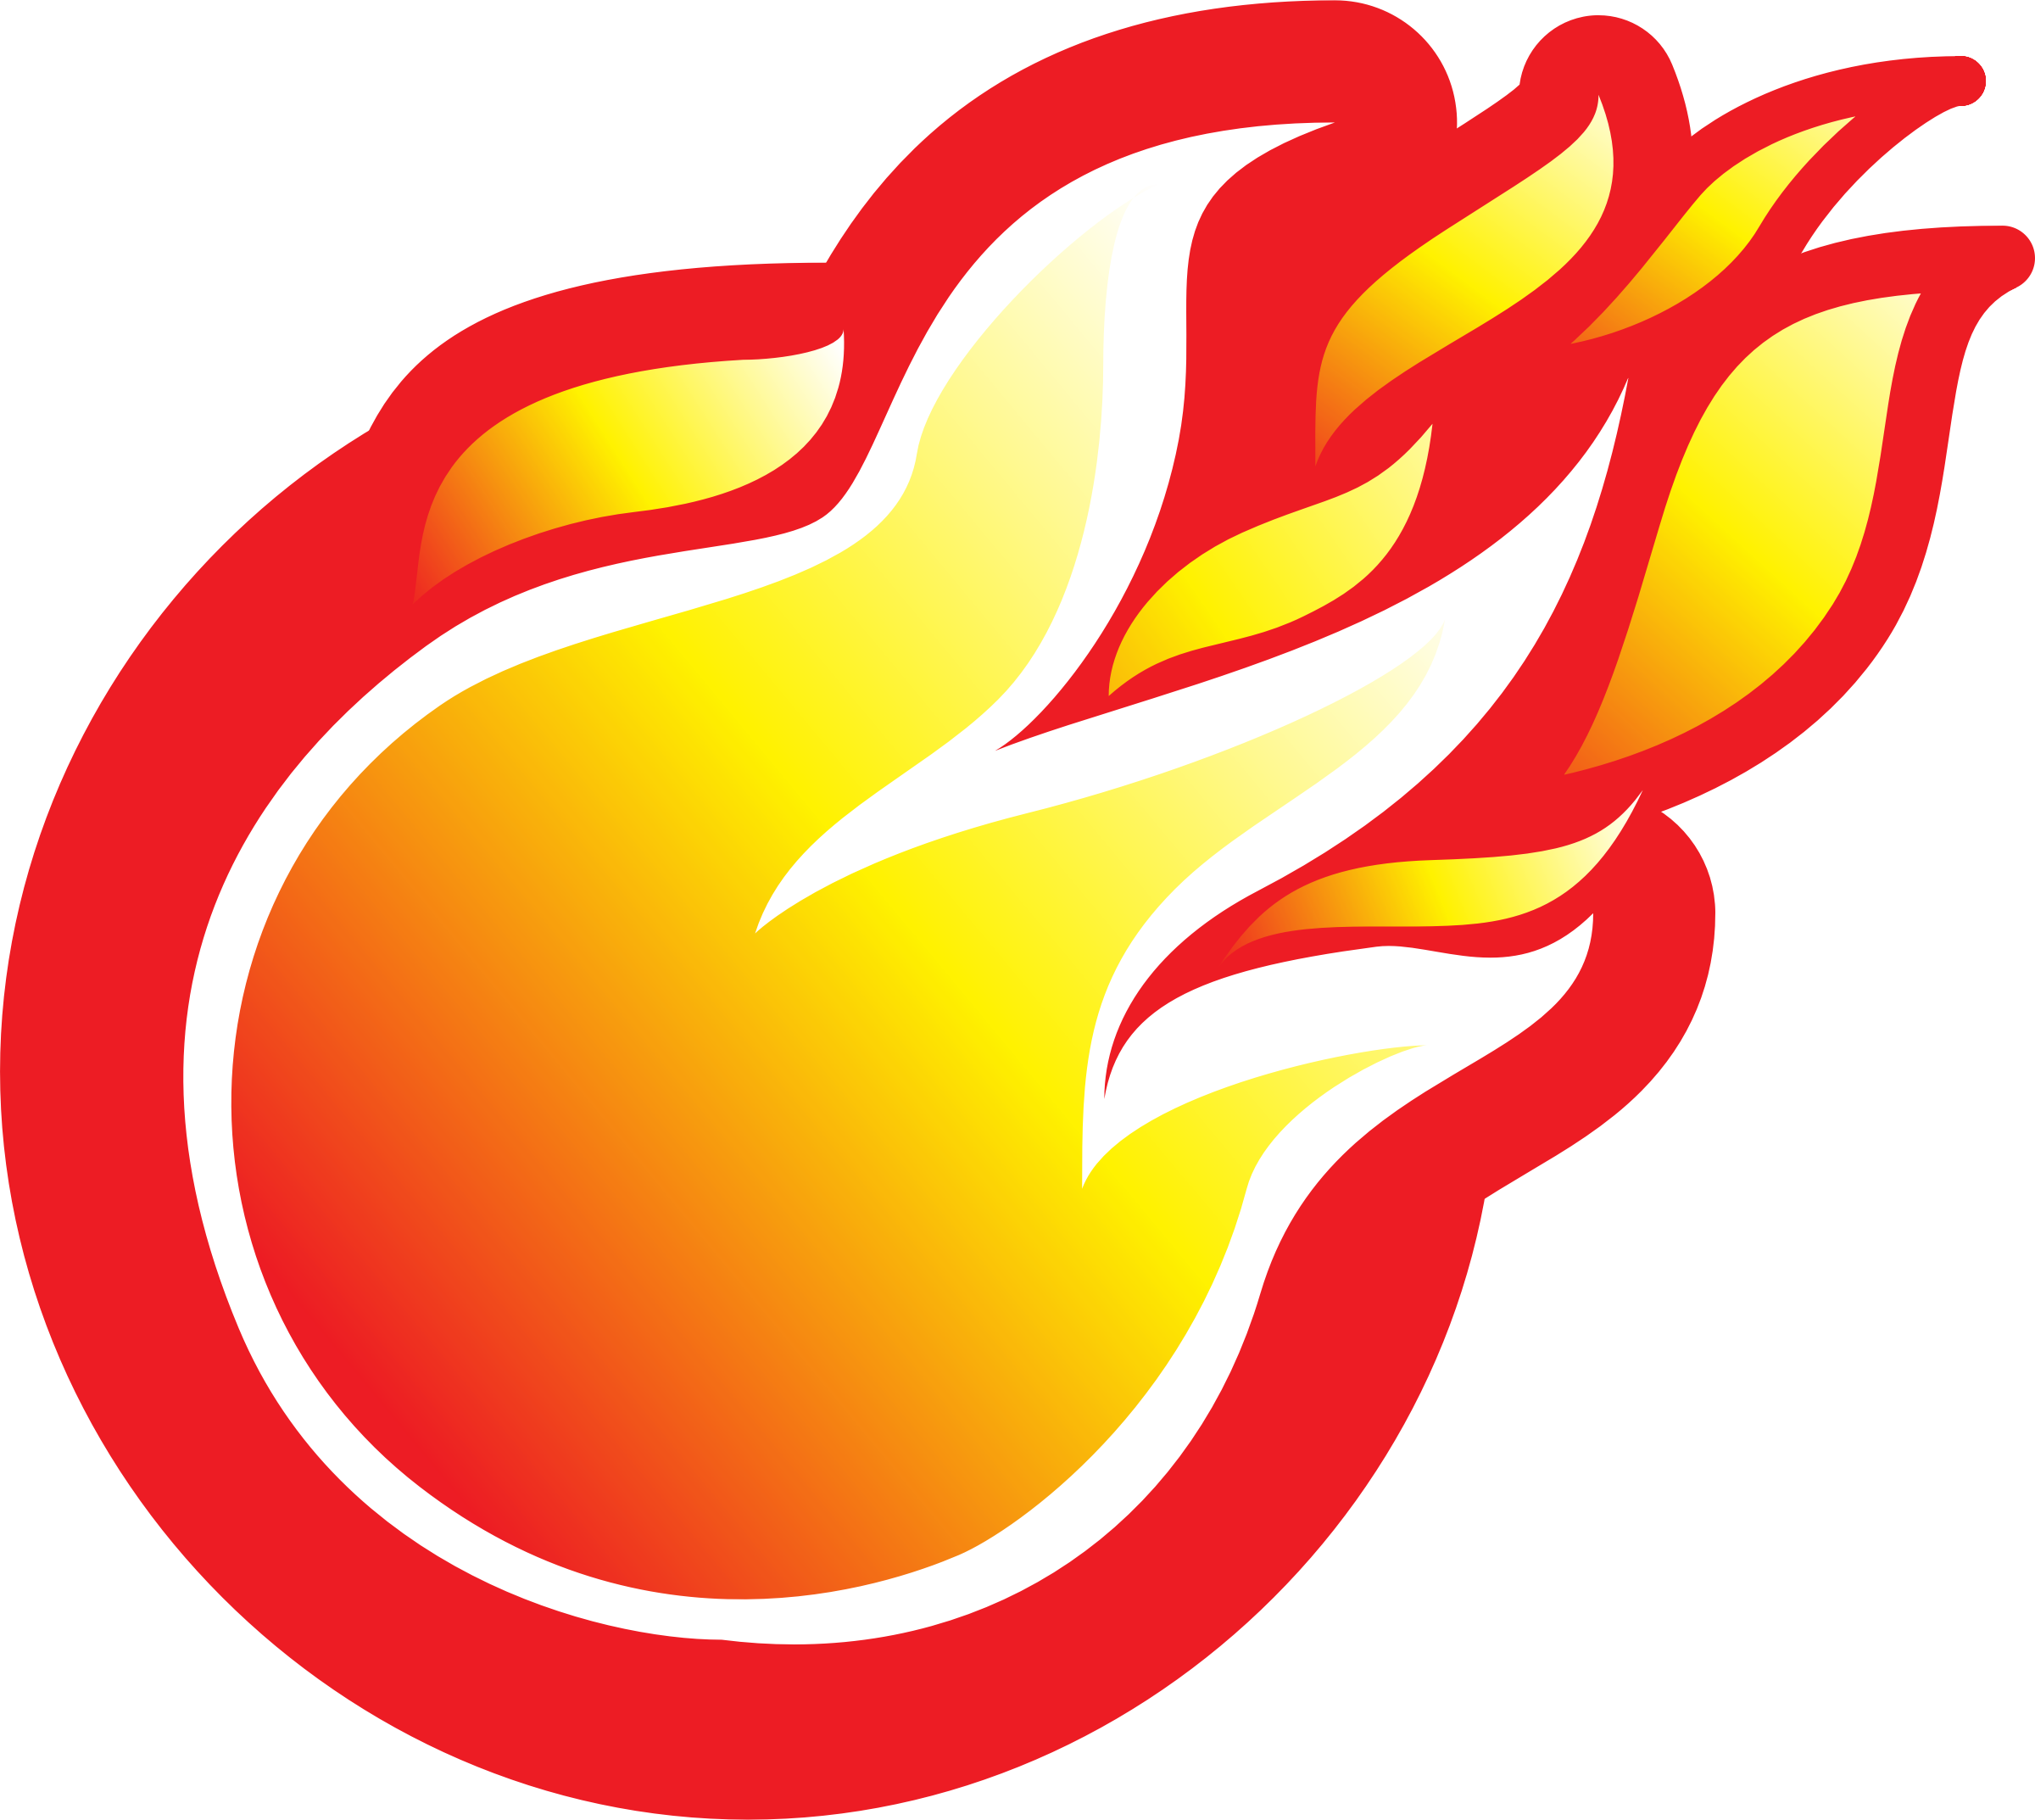 Flame fire icon clipart image #6995